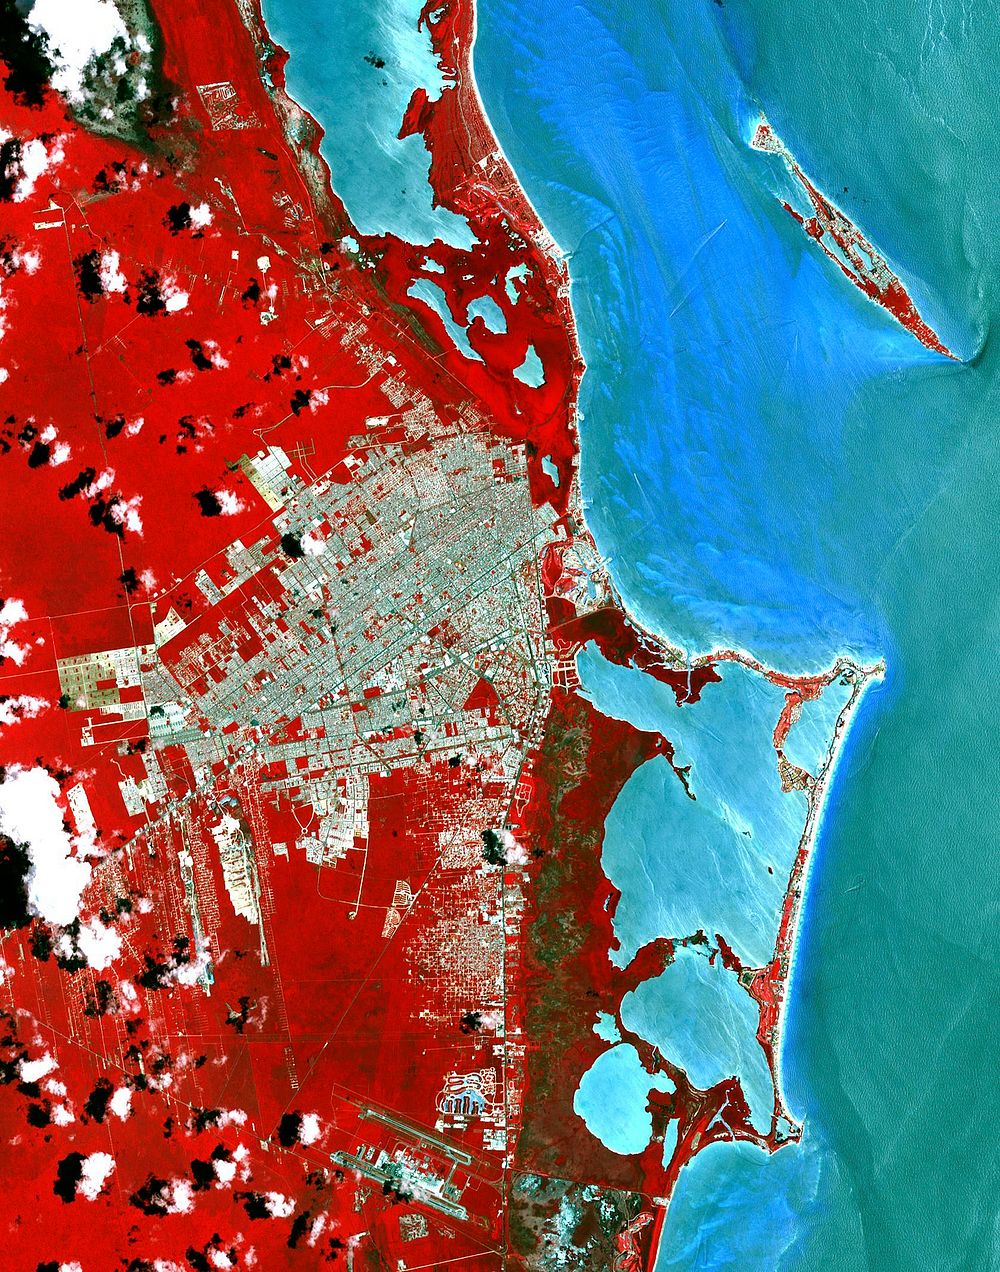 Cancun, a resort city on the east side of Mexico's Yucatan Peninsula. Original from NASA. Digitally enhanced by rawpixel.